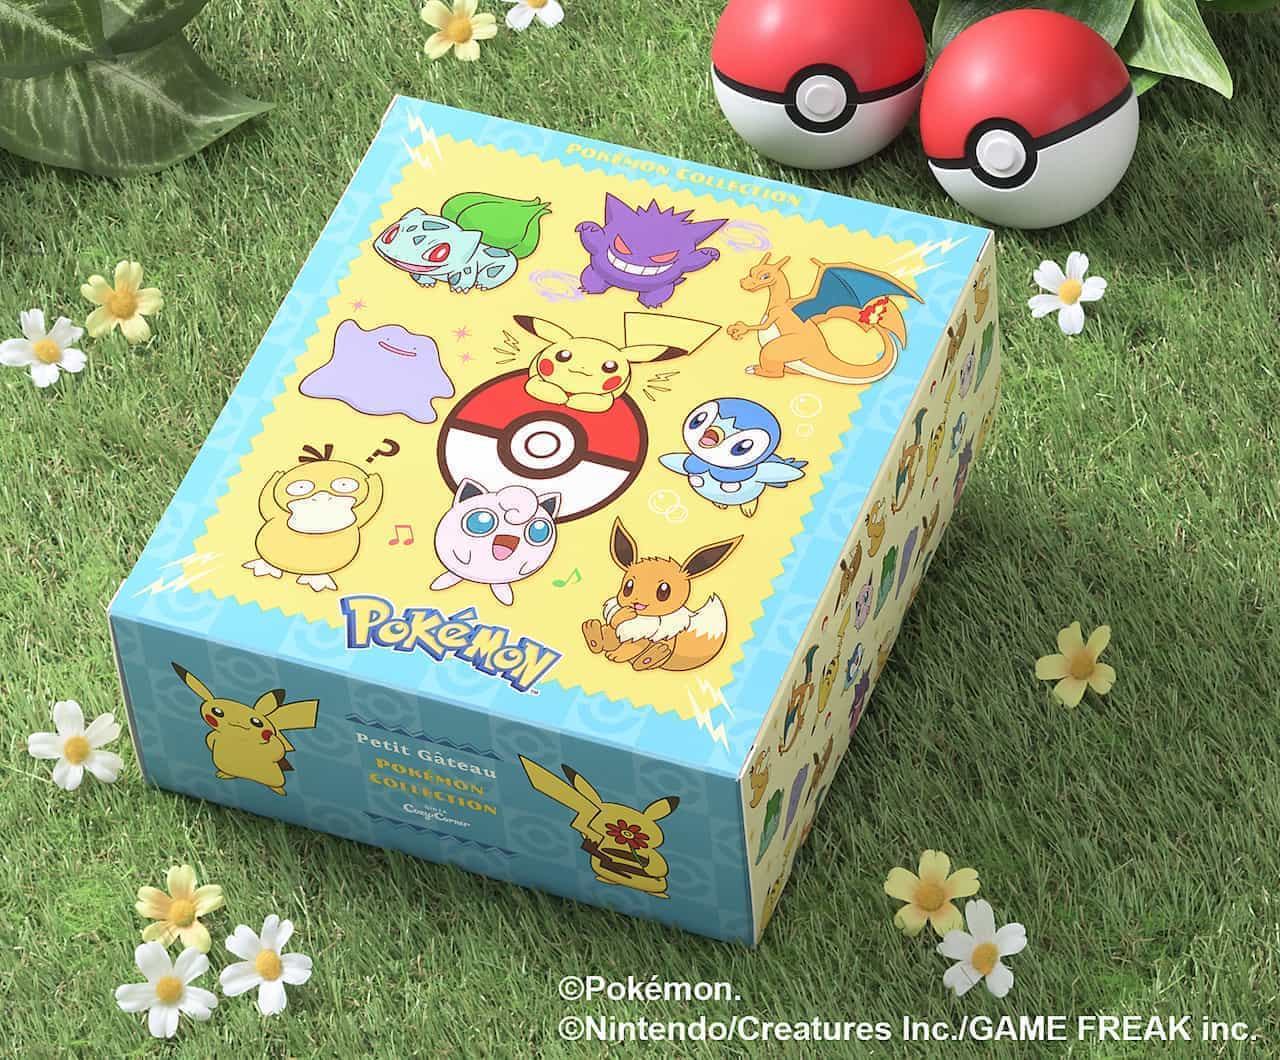 Pokemon Collection (9 pieces) from Ginza Cozy Corner